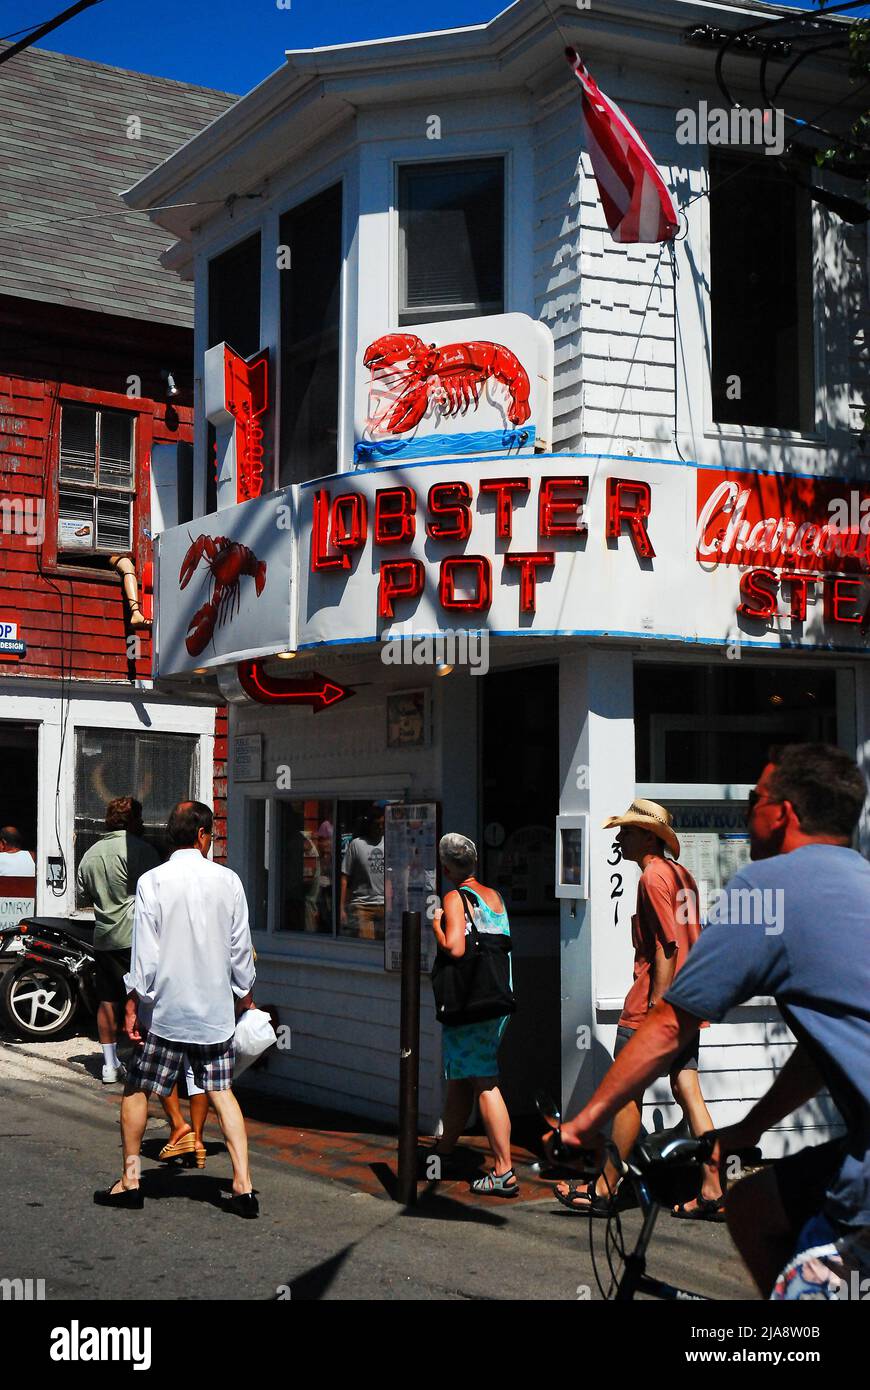 A summer crowd passes in front of the Lobster House in Provincetown, Cape Cod, Massachusetts Stock Photo